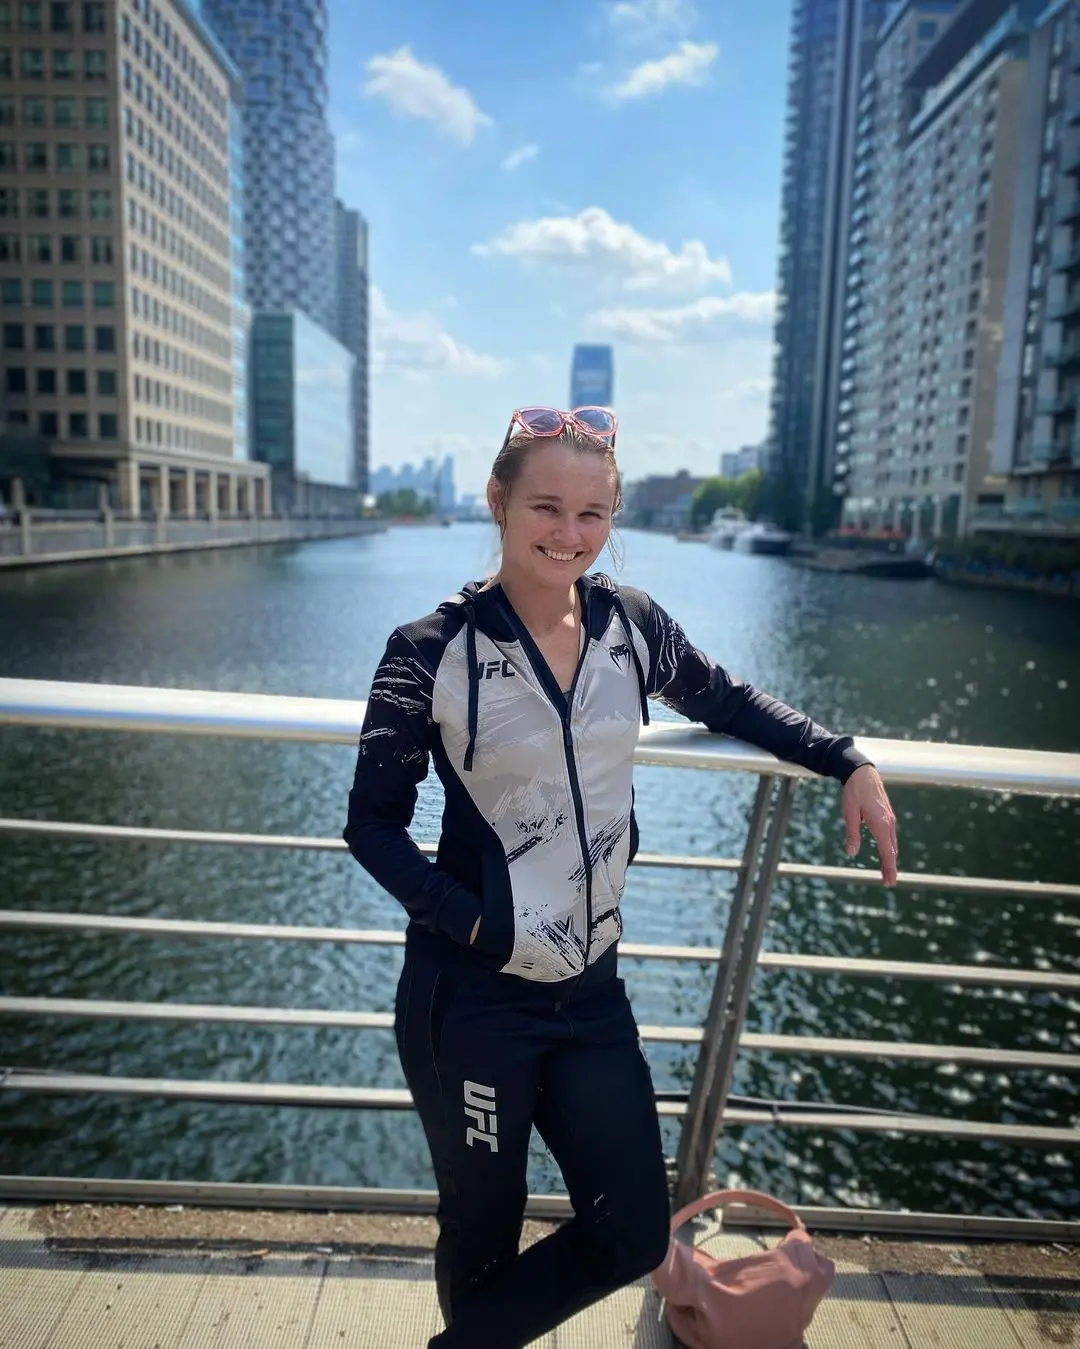 Andrea lee enjoying the sights in London South Quay Foot Bridge in 2022